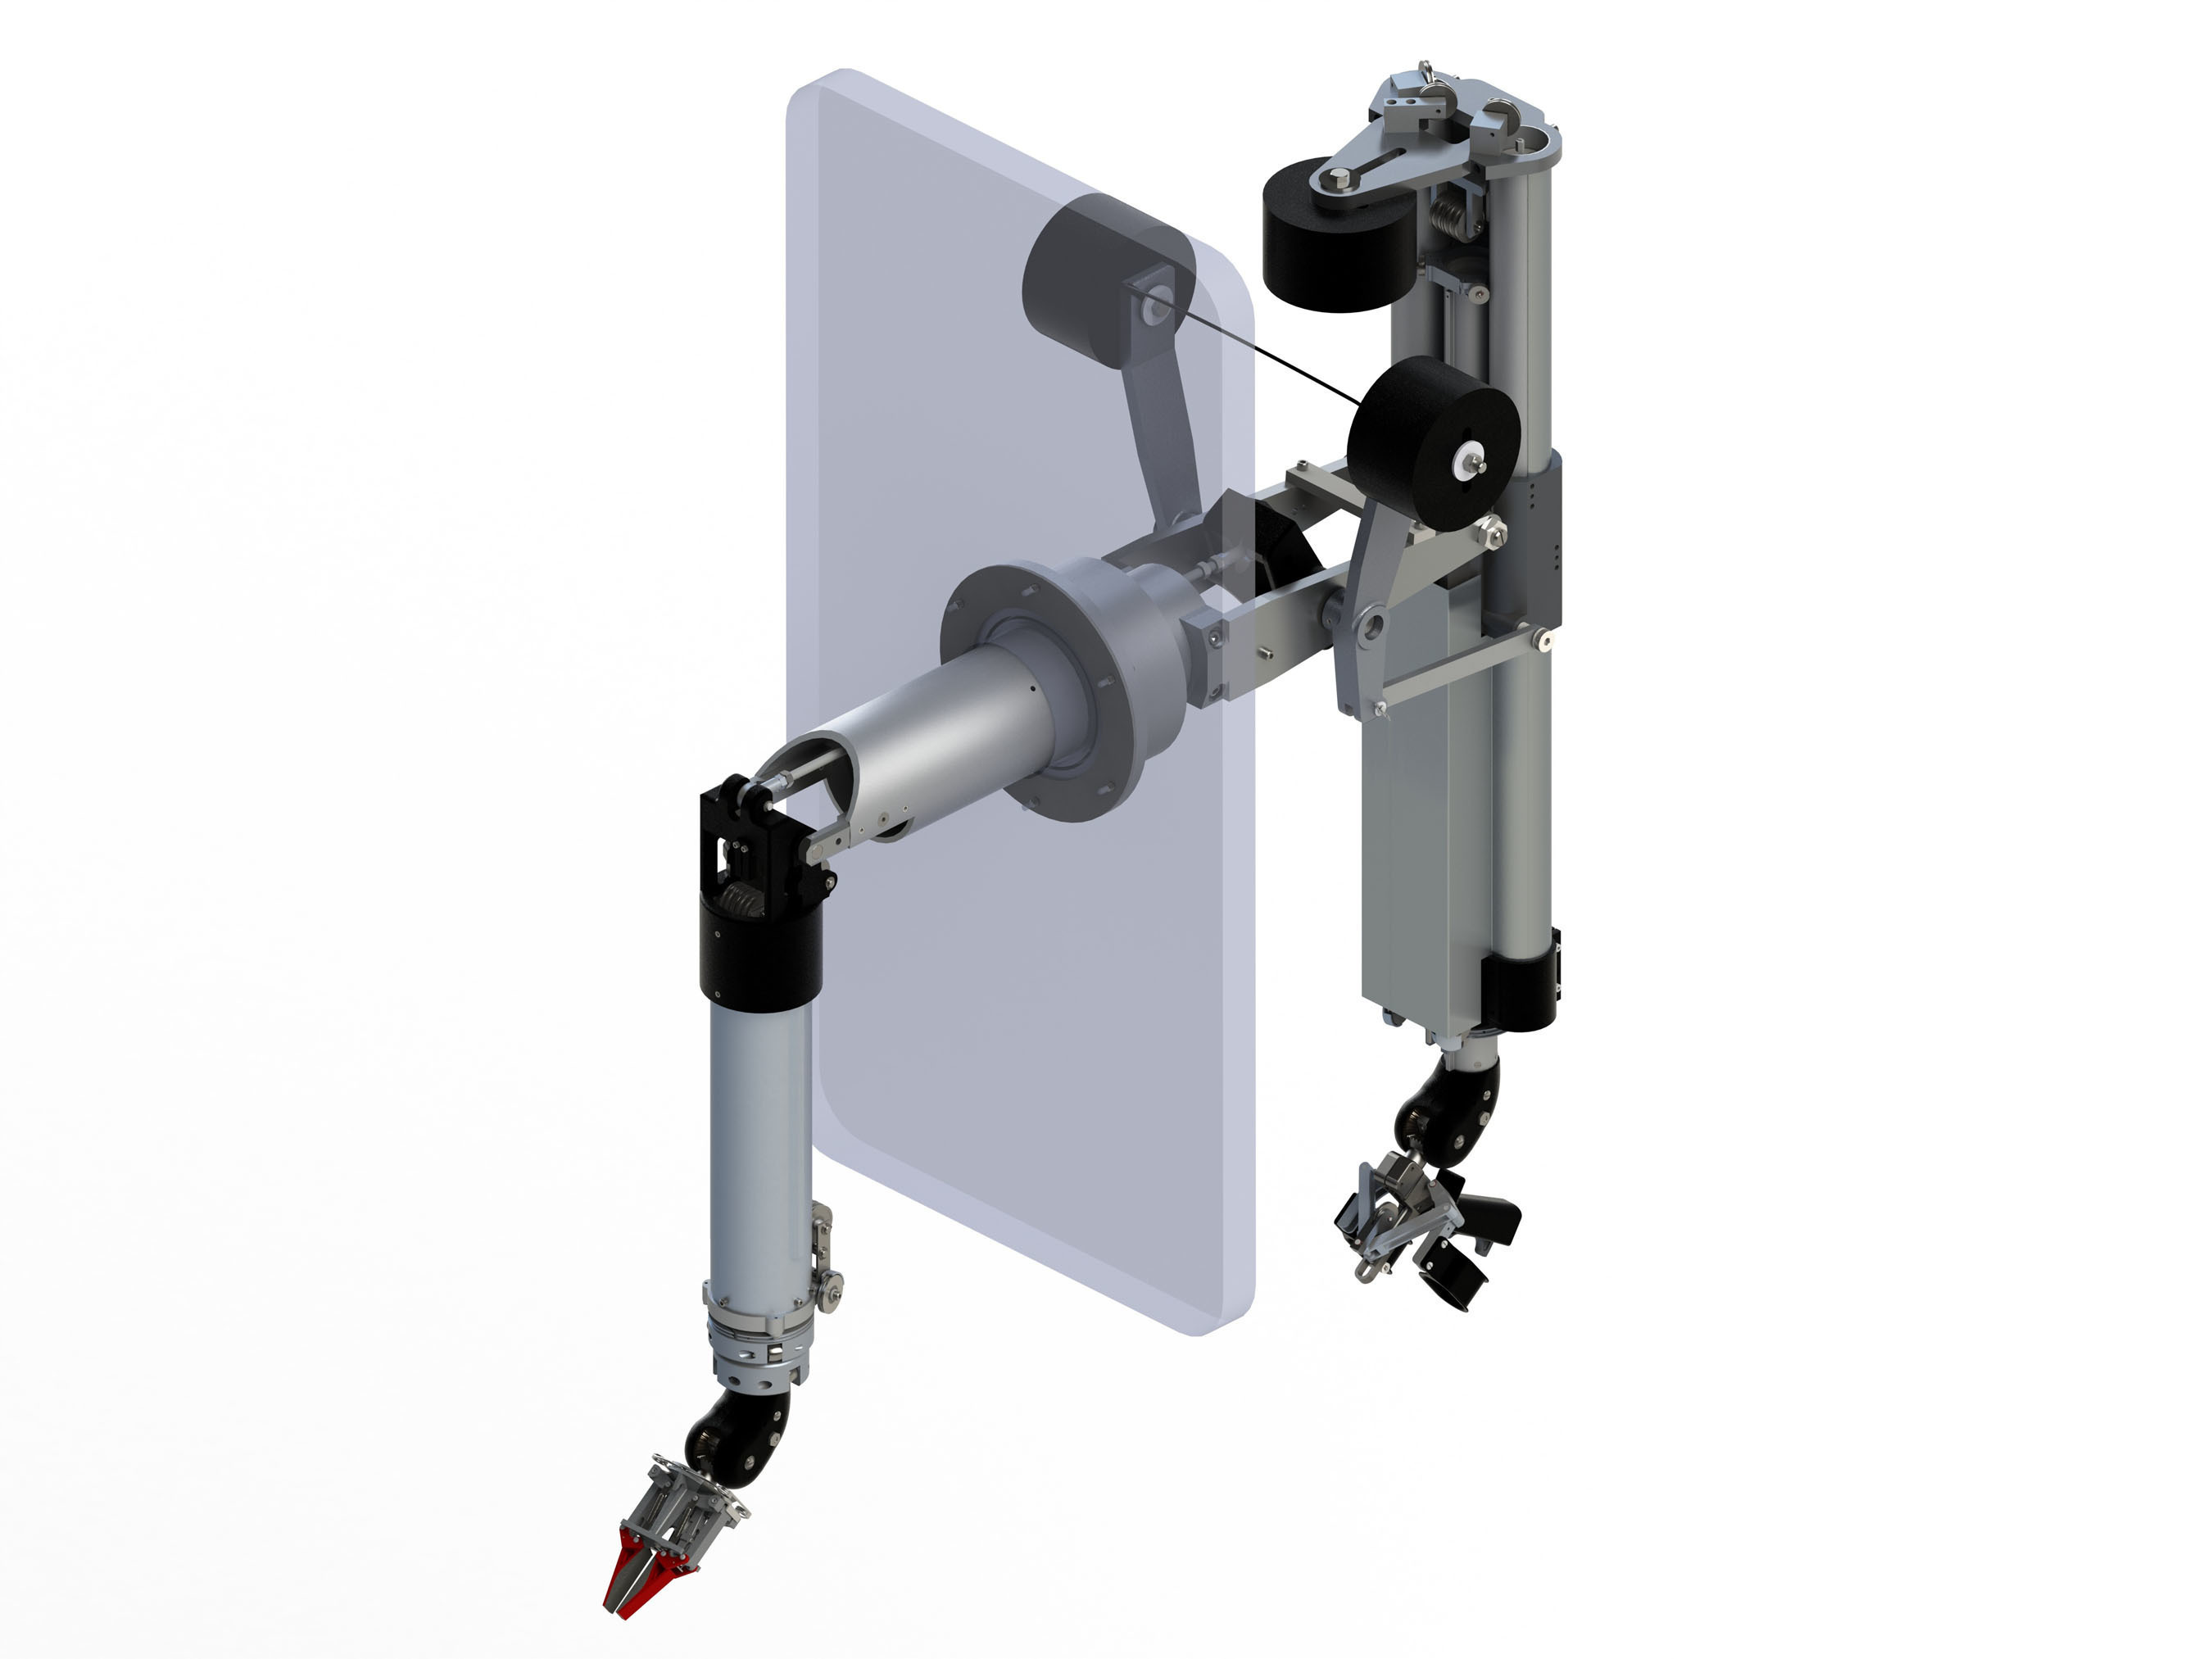 Central Research Laboratories (CRL) introduces G-LDR, a more compact telemanipulator design which enables more flexible and cost-effective installations. (PRNewsFoto/Central Research Laboratories)